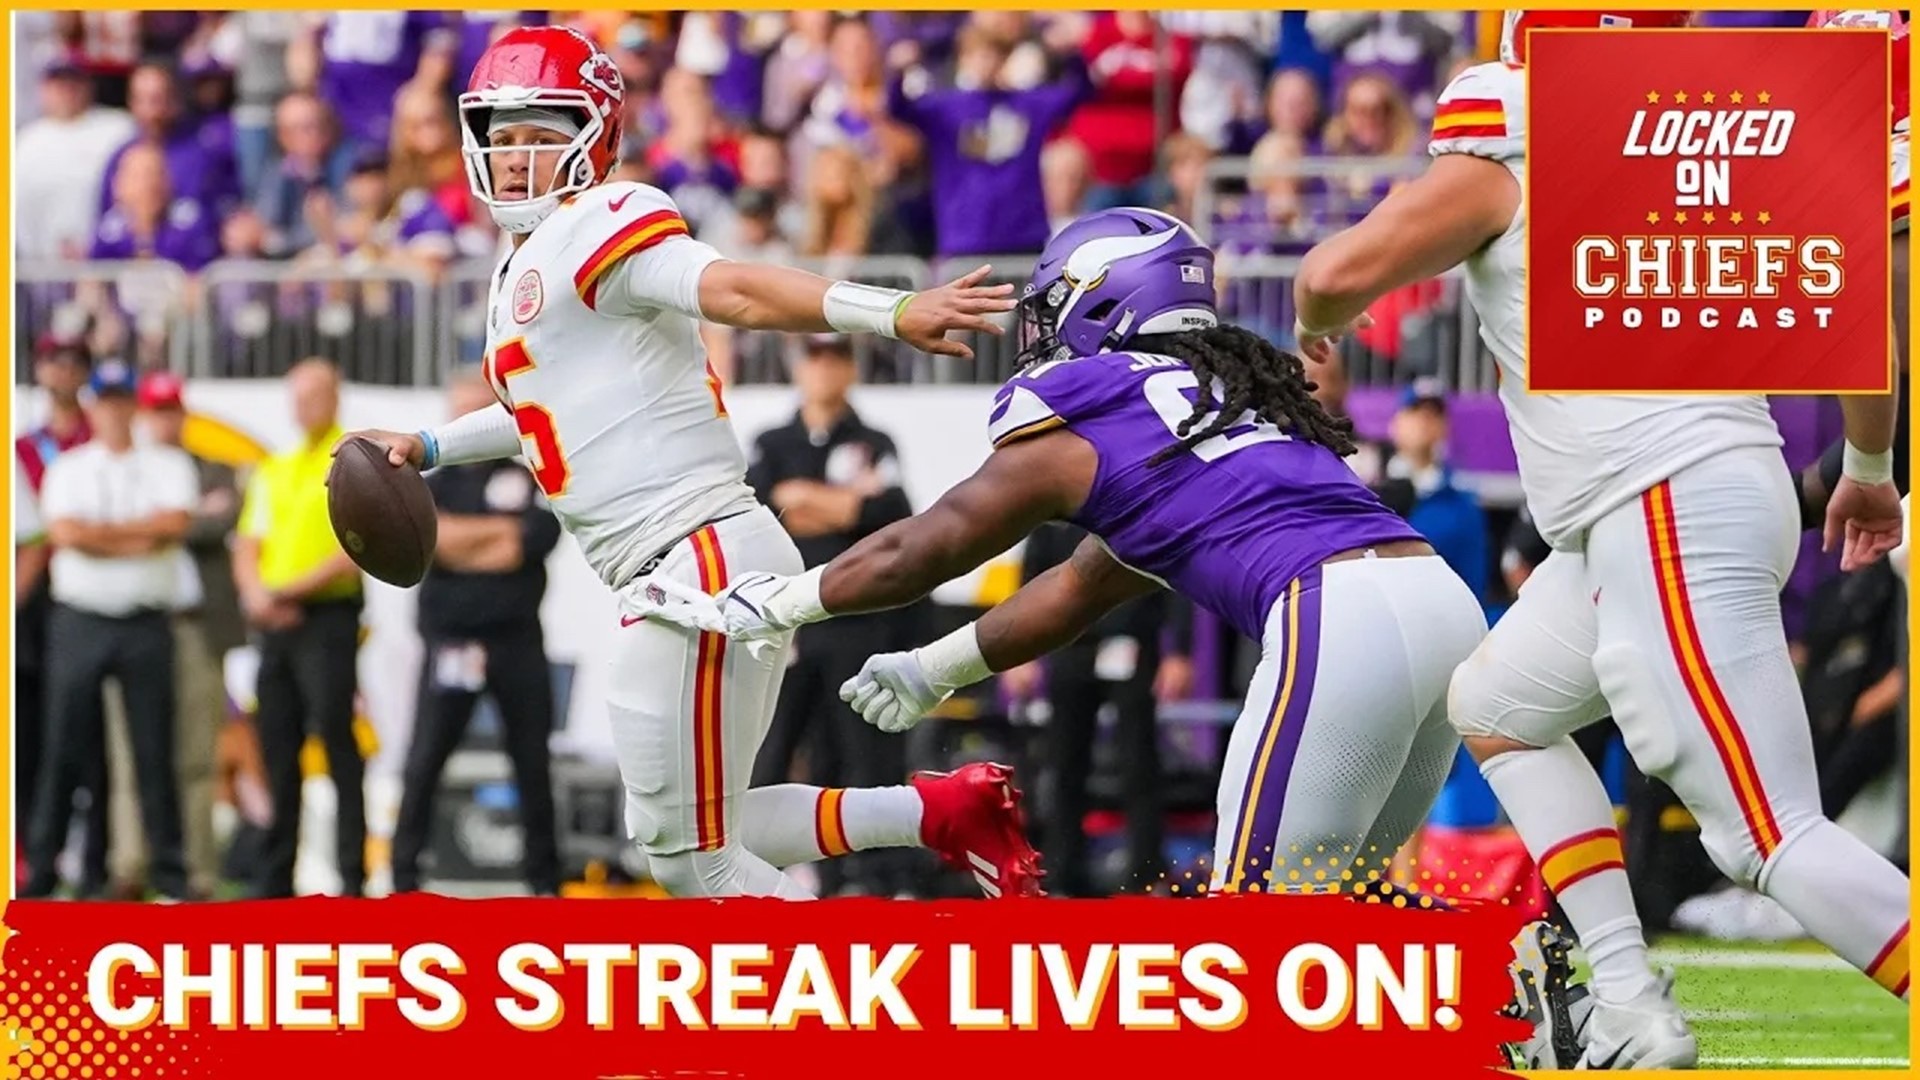 The Kansas City Chiefs have won 15 straight games against the Denver Broncos and it is one of the longest streaks in the NFL.